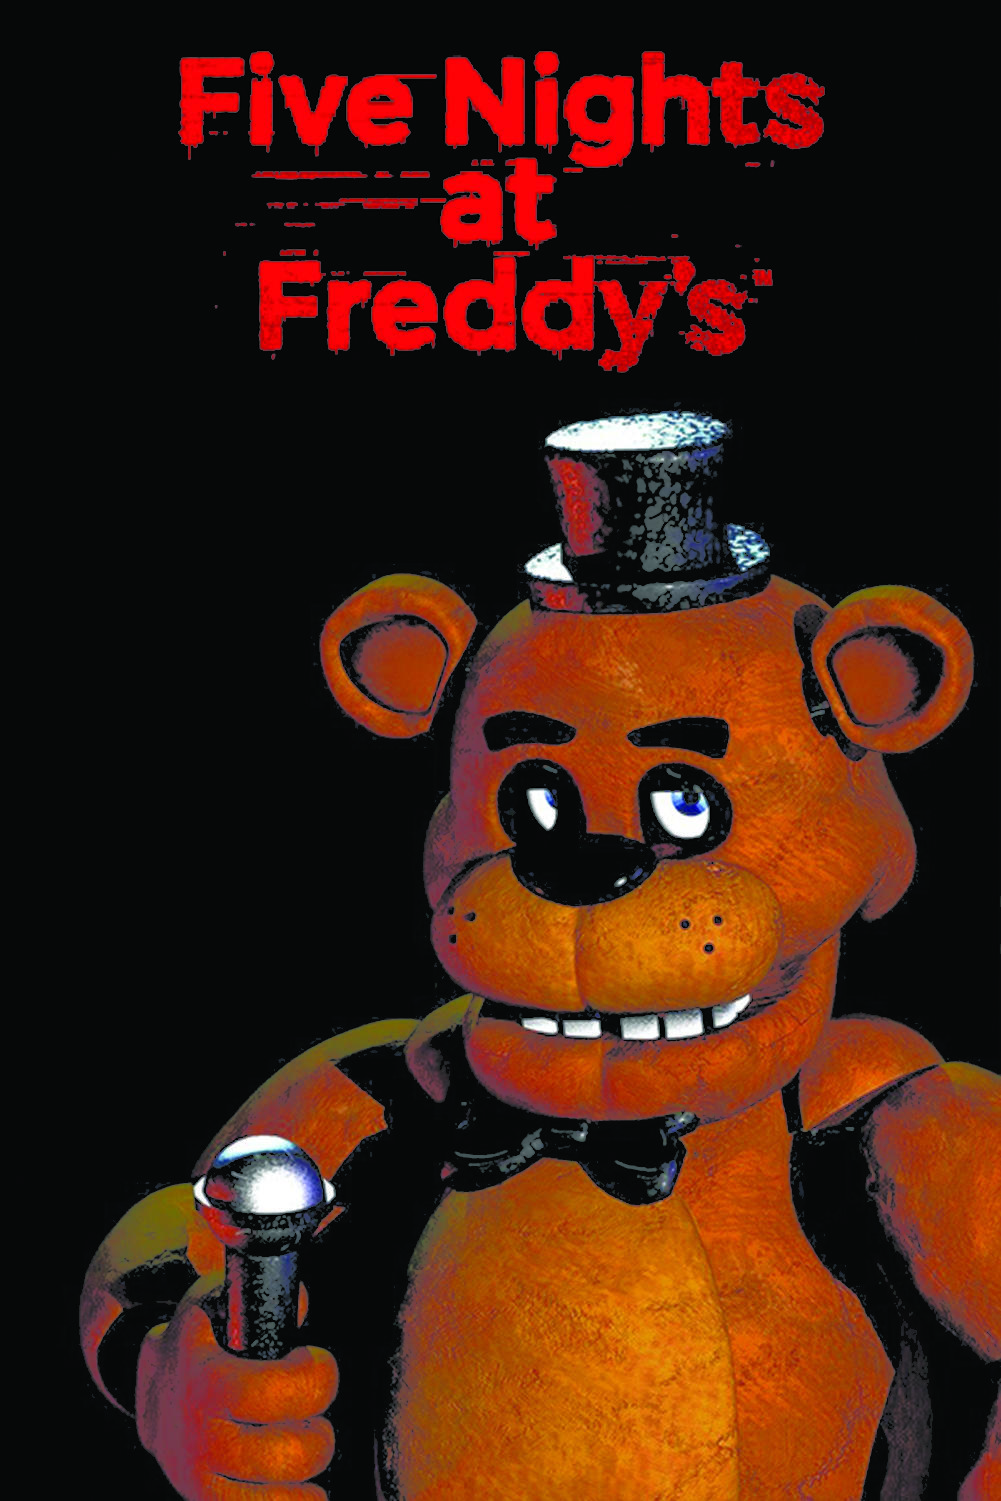 FNAF THEORIES (The Expanded Universe of the Five Nights At